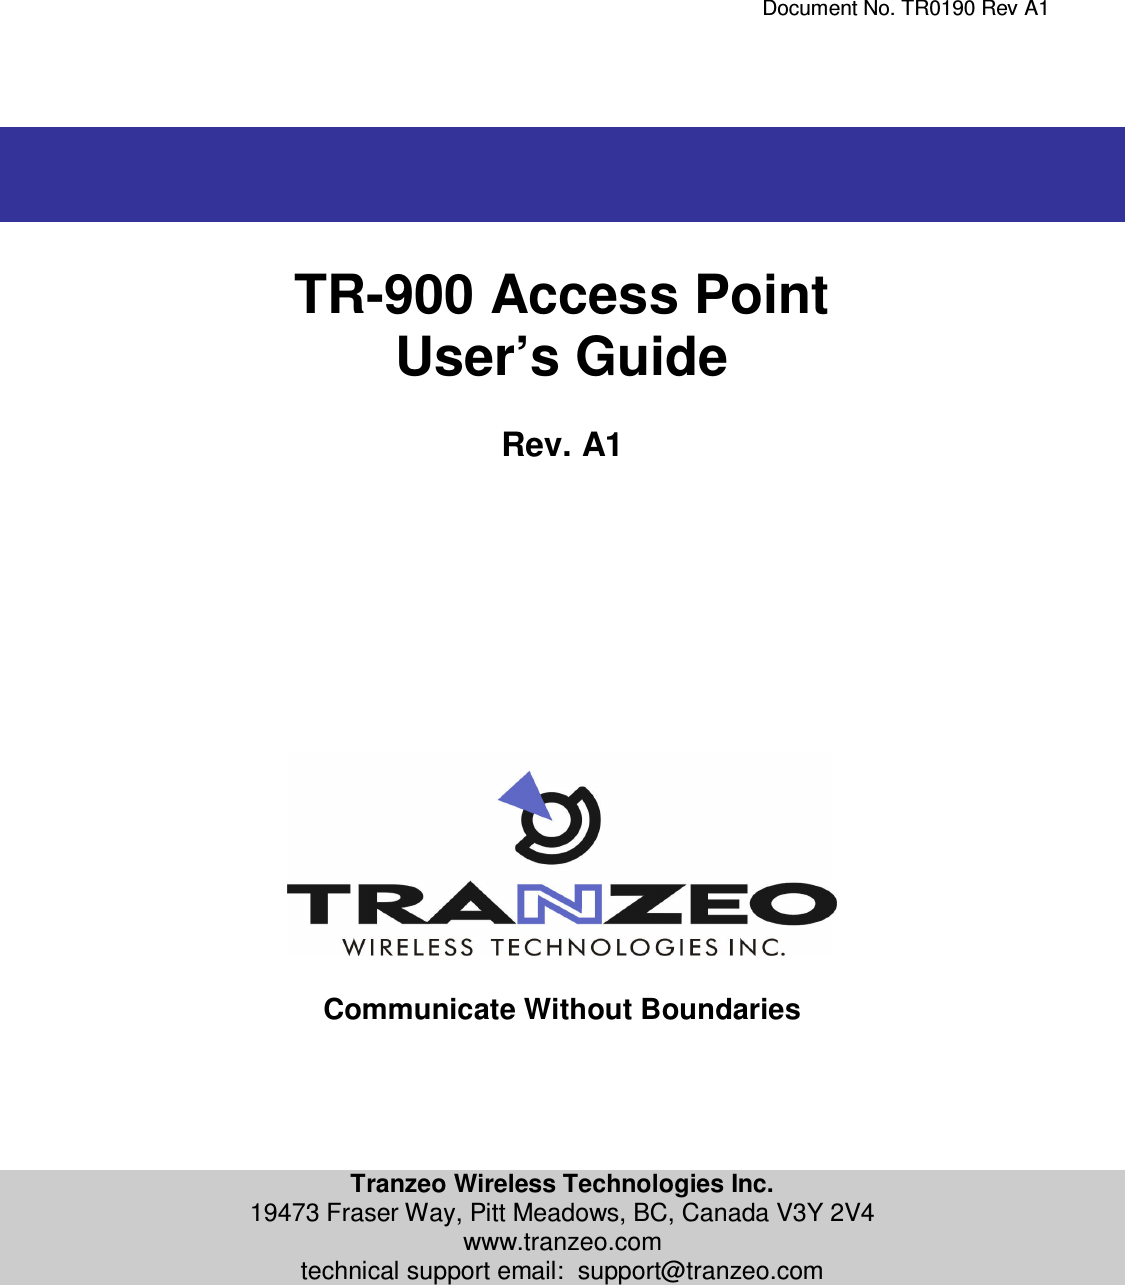     Document No. TR0190 Rev A1     TR-900 Access Point User’s Guide  Rev. A1                   Communicate Without Boundaries      Tranzeo Wireless Technologies Inc. 19473 Fraser Way, Pitt Meadows, BC, Canada V3Y 2V4 www.tranzeo.com technical support email:  support@tranzeo.com   